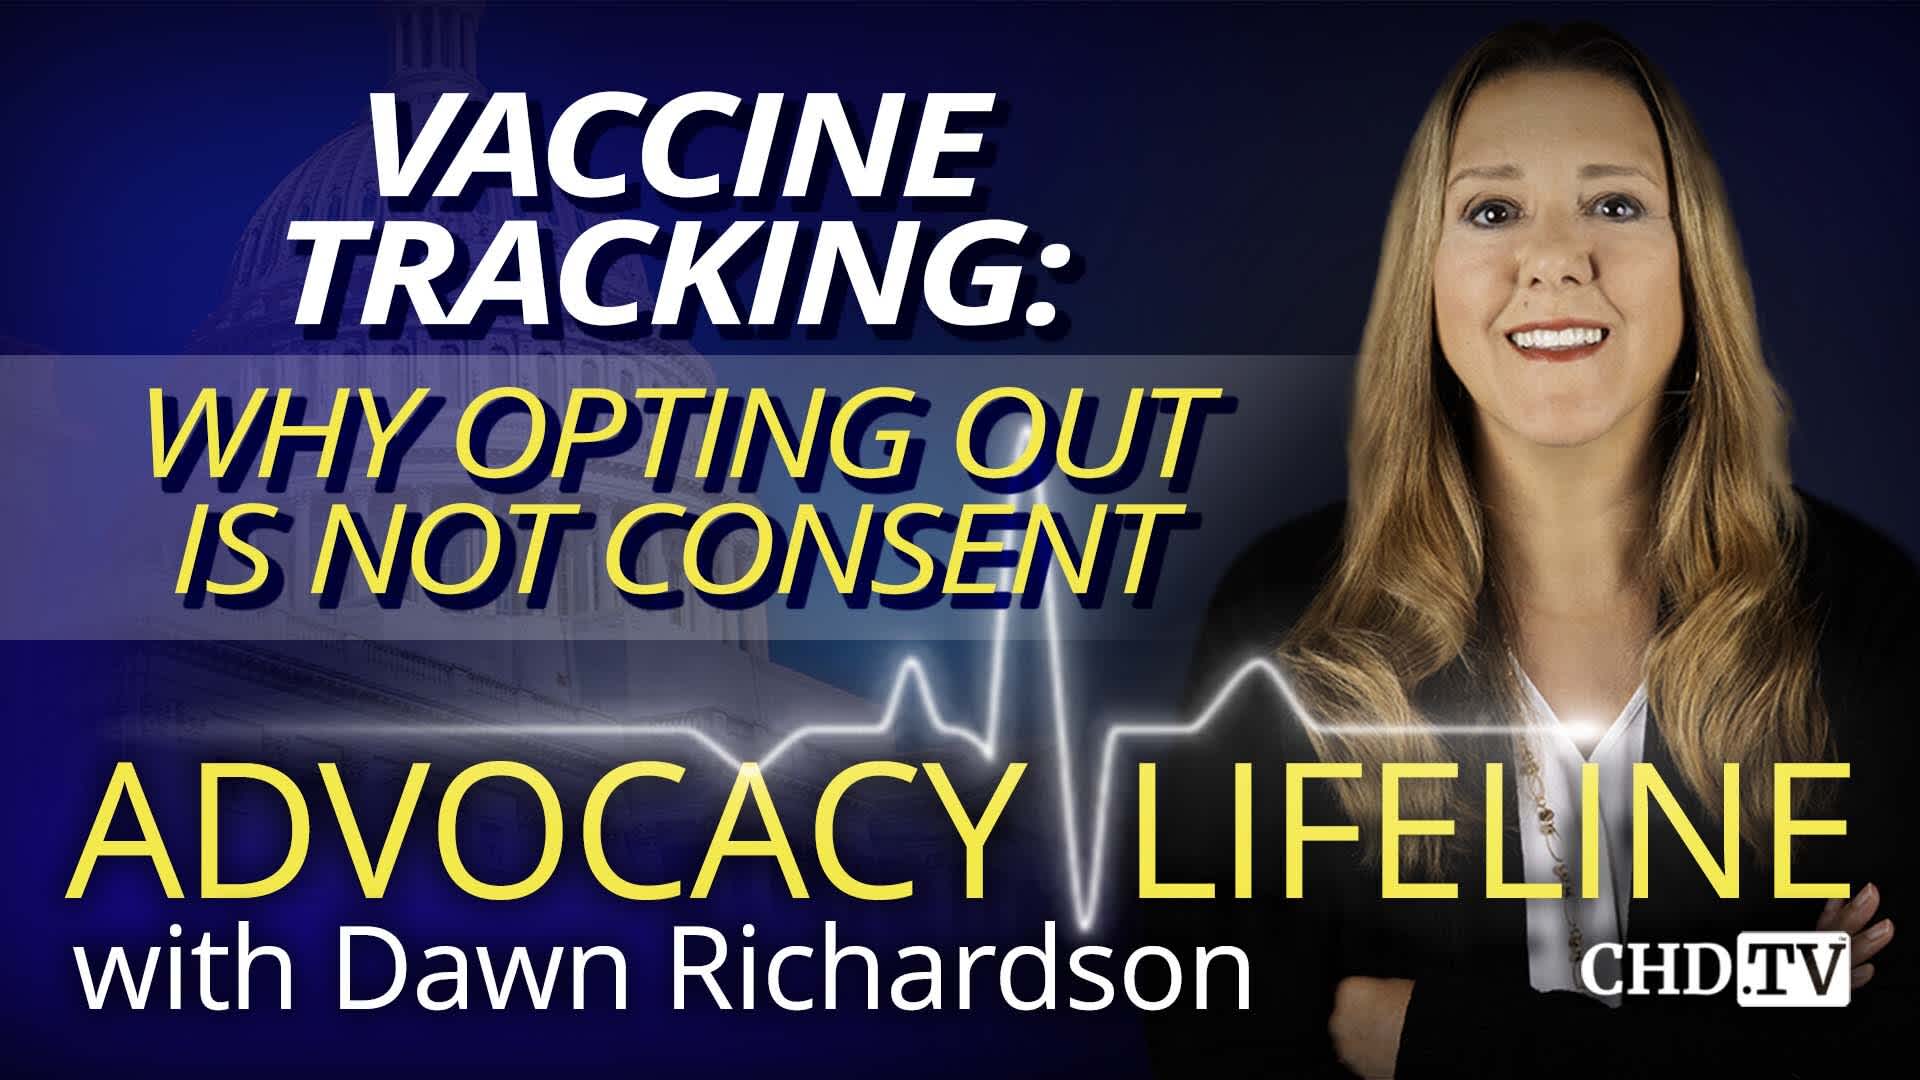 Vaccine Tracking: Why Opting Out is NOT Consent